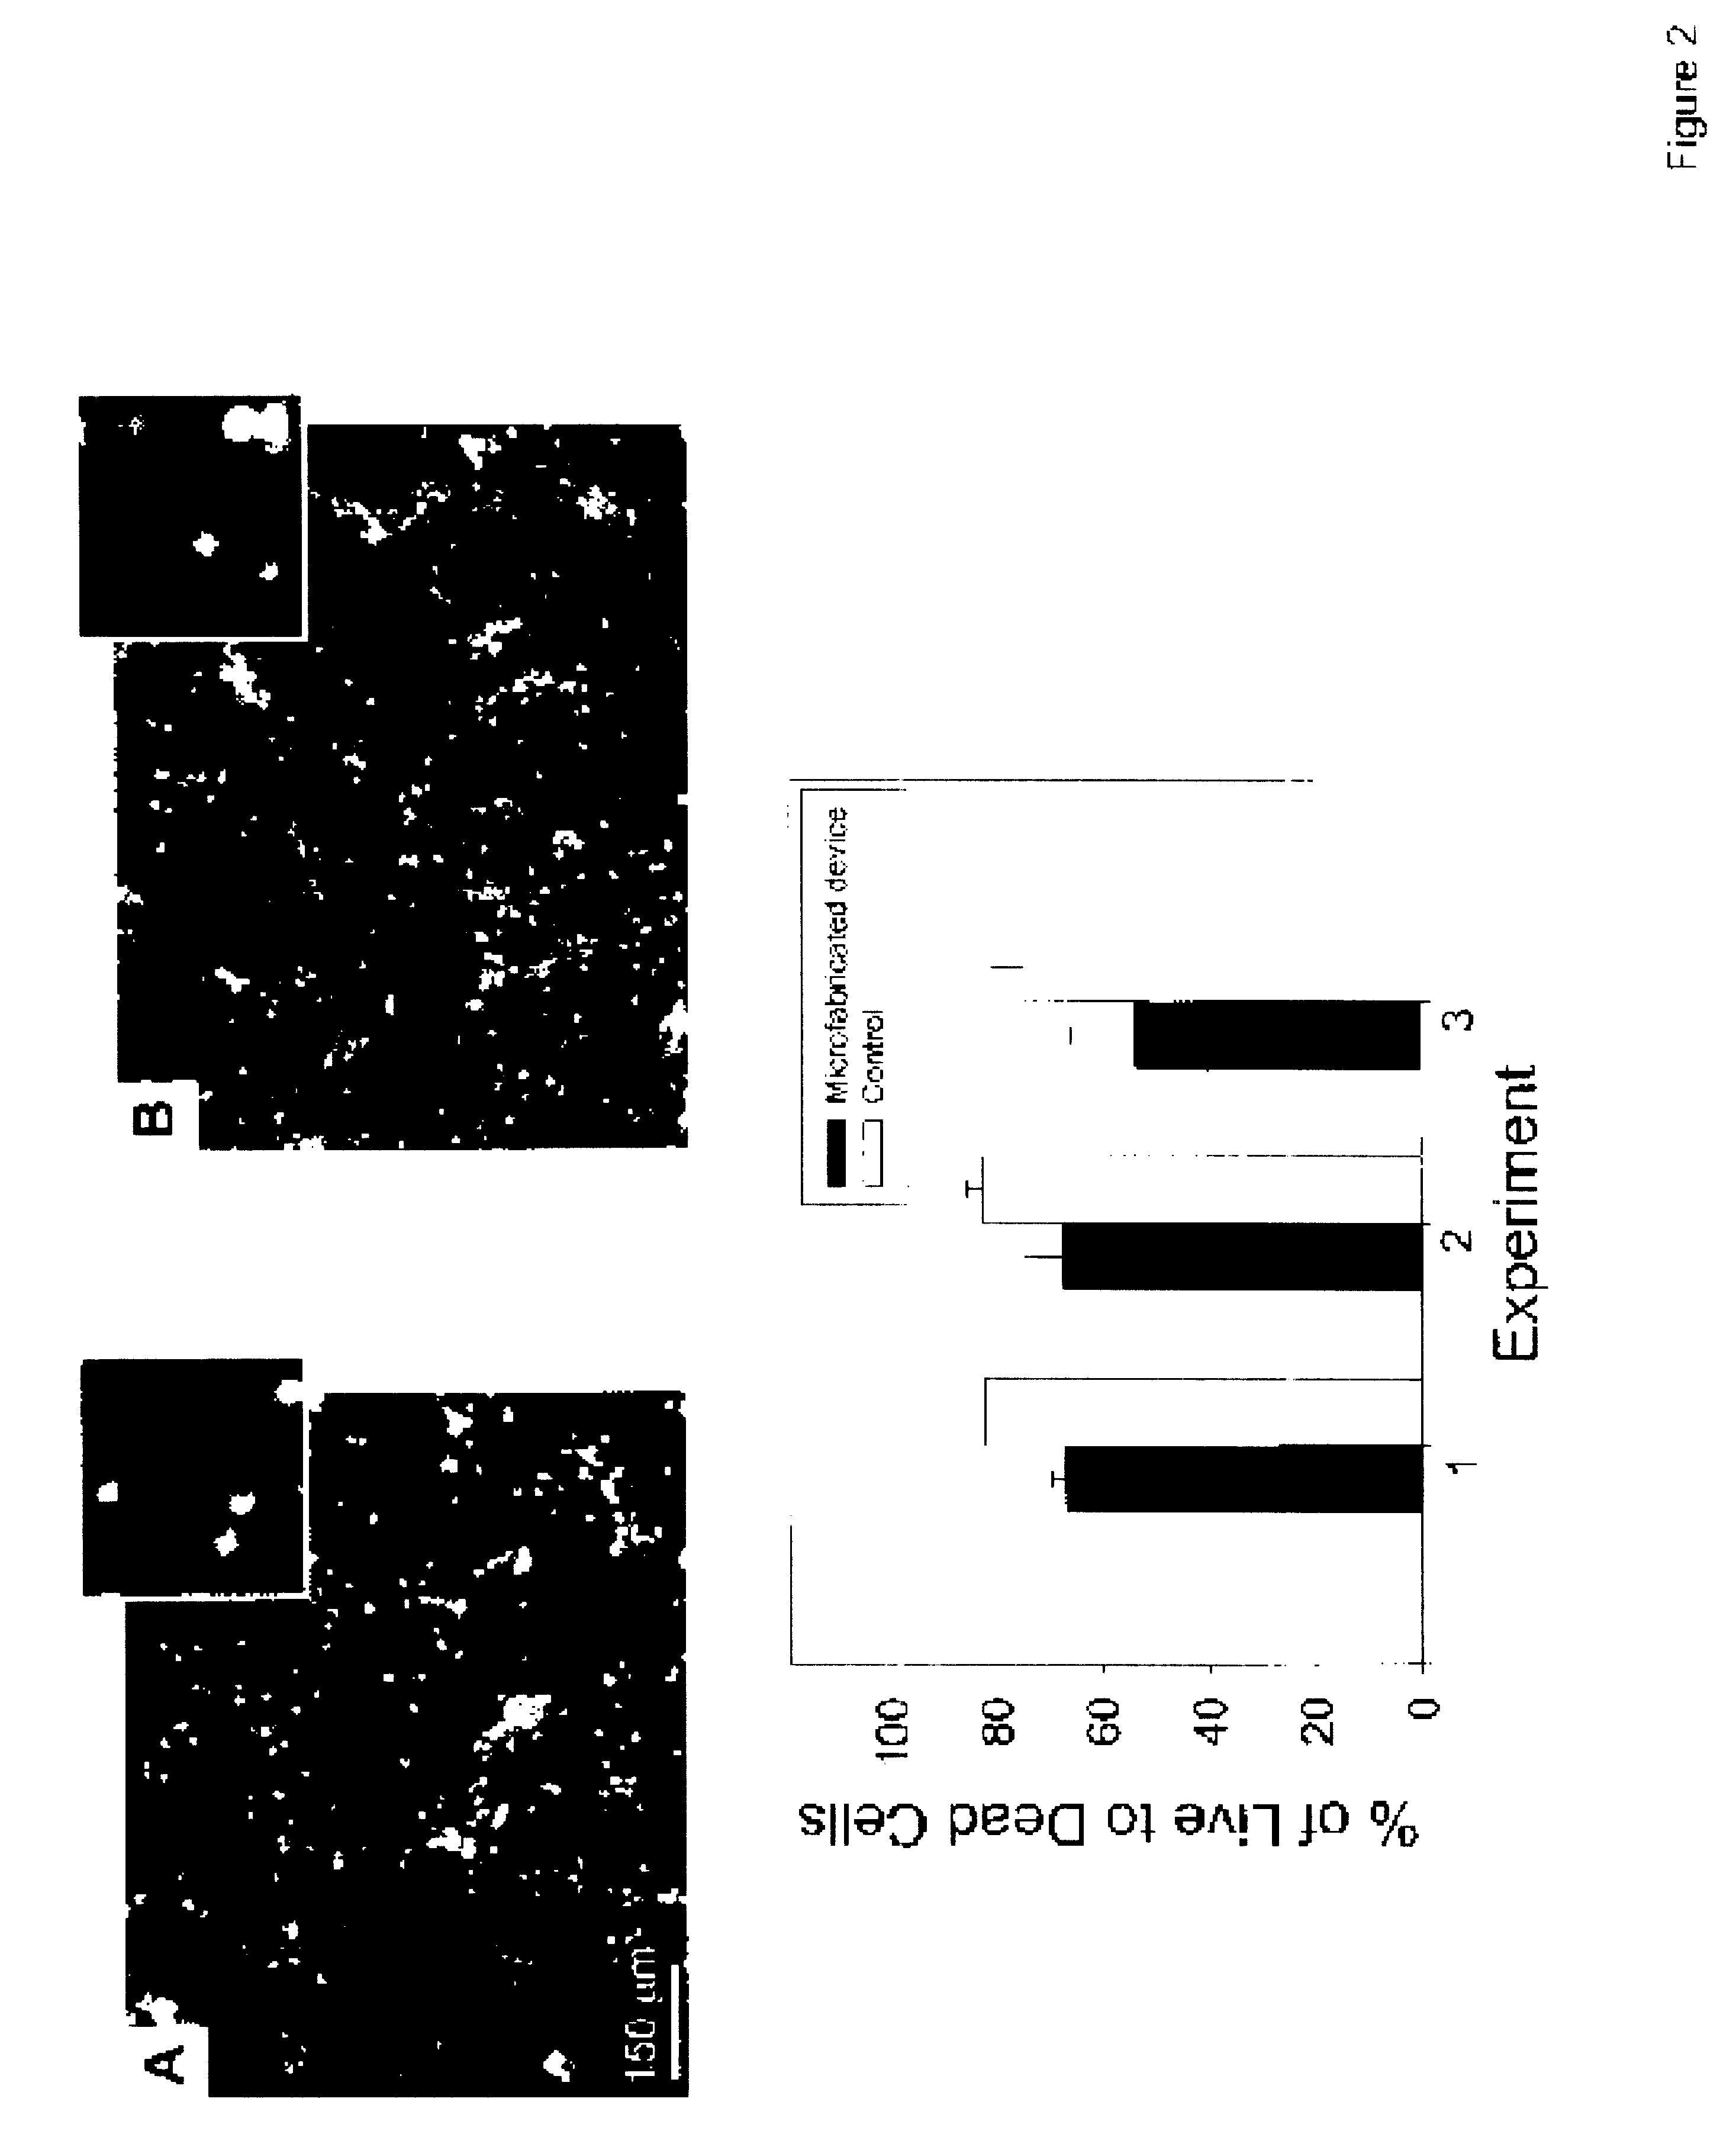 Microfluidic device for enabling fluidic isolation among interconnected compartments within the apparatus and methods relating to same